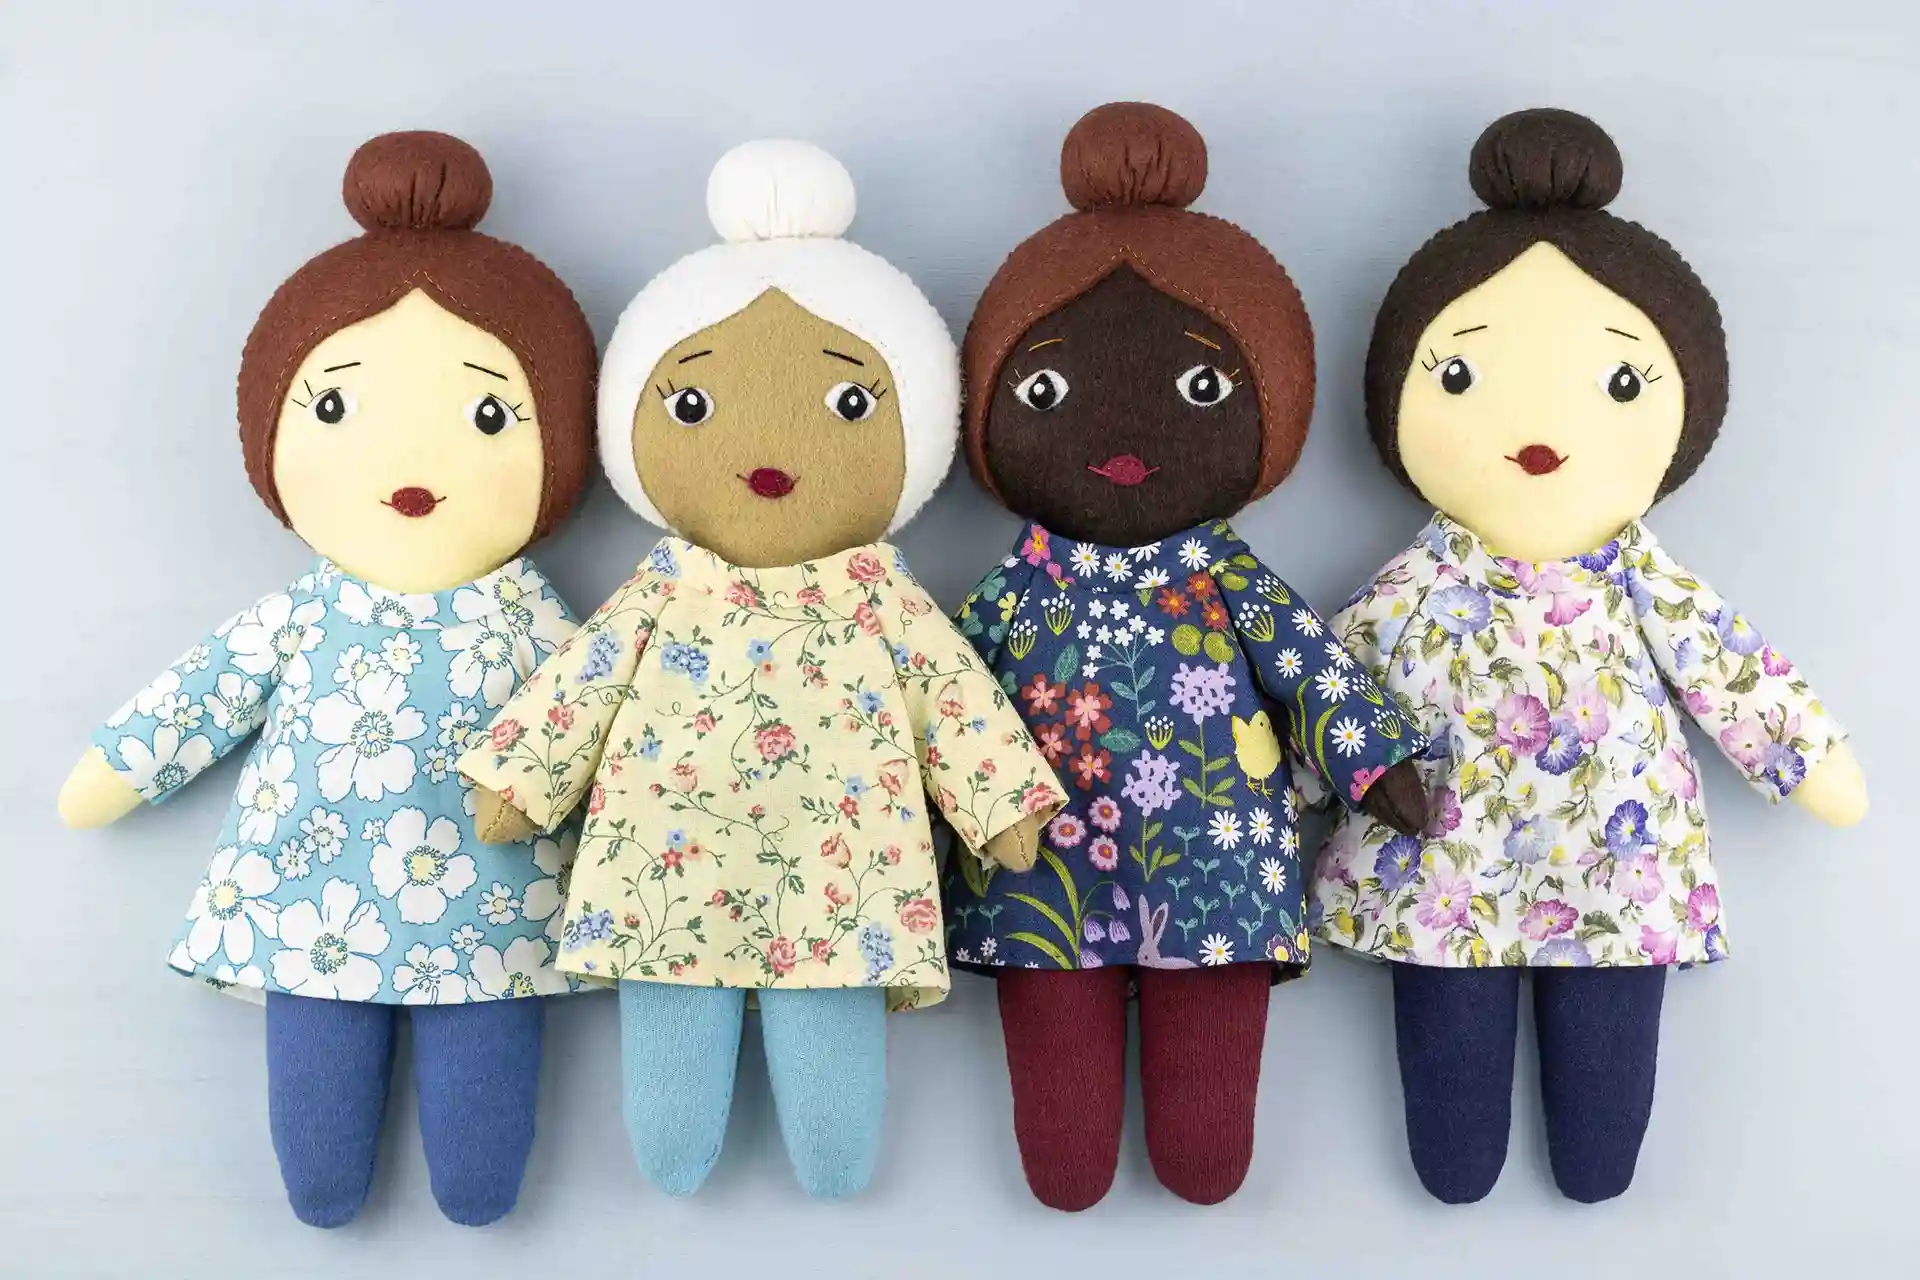 A row of four Daisy dolls with ballerina bun hairstyles, floral print tunics and matching tights.